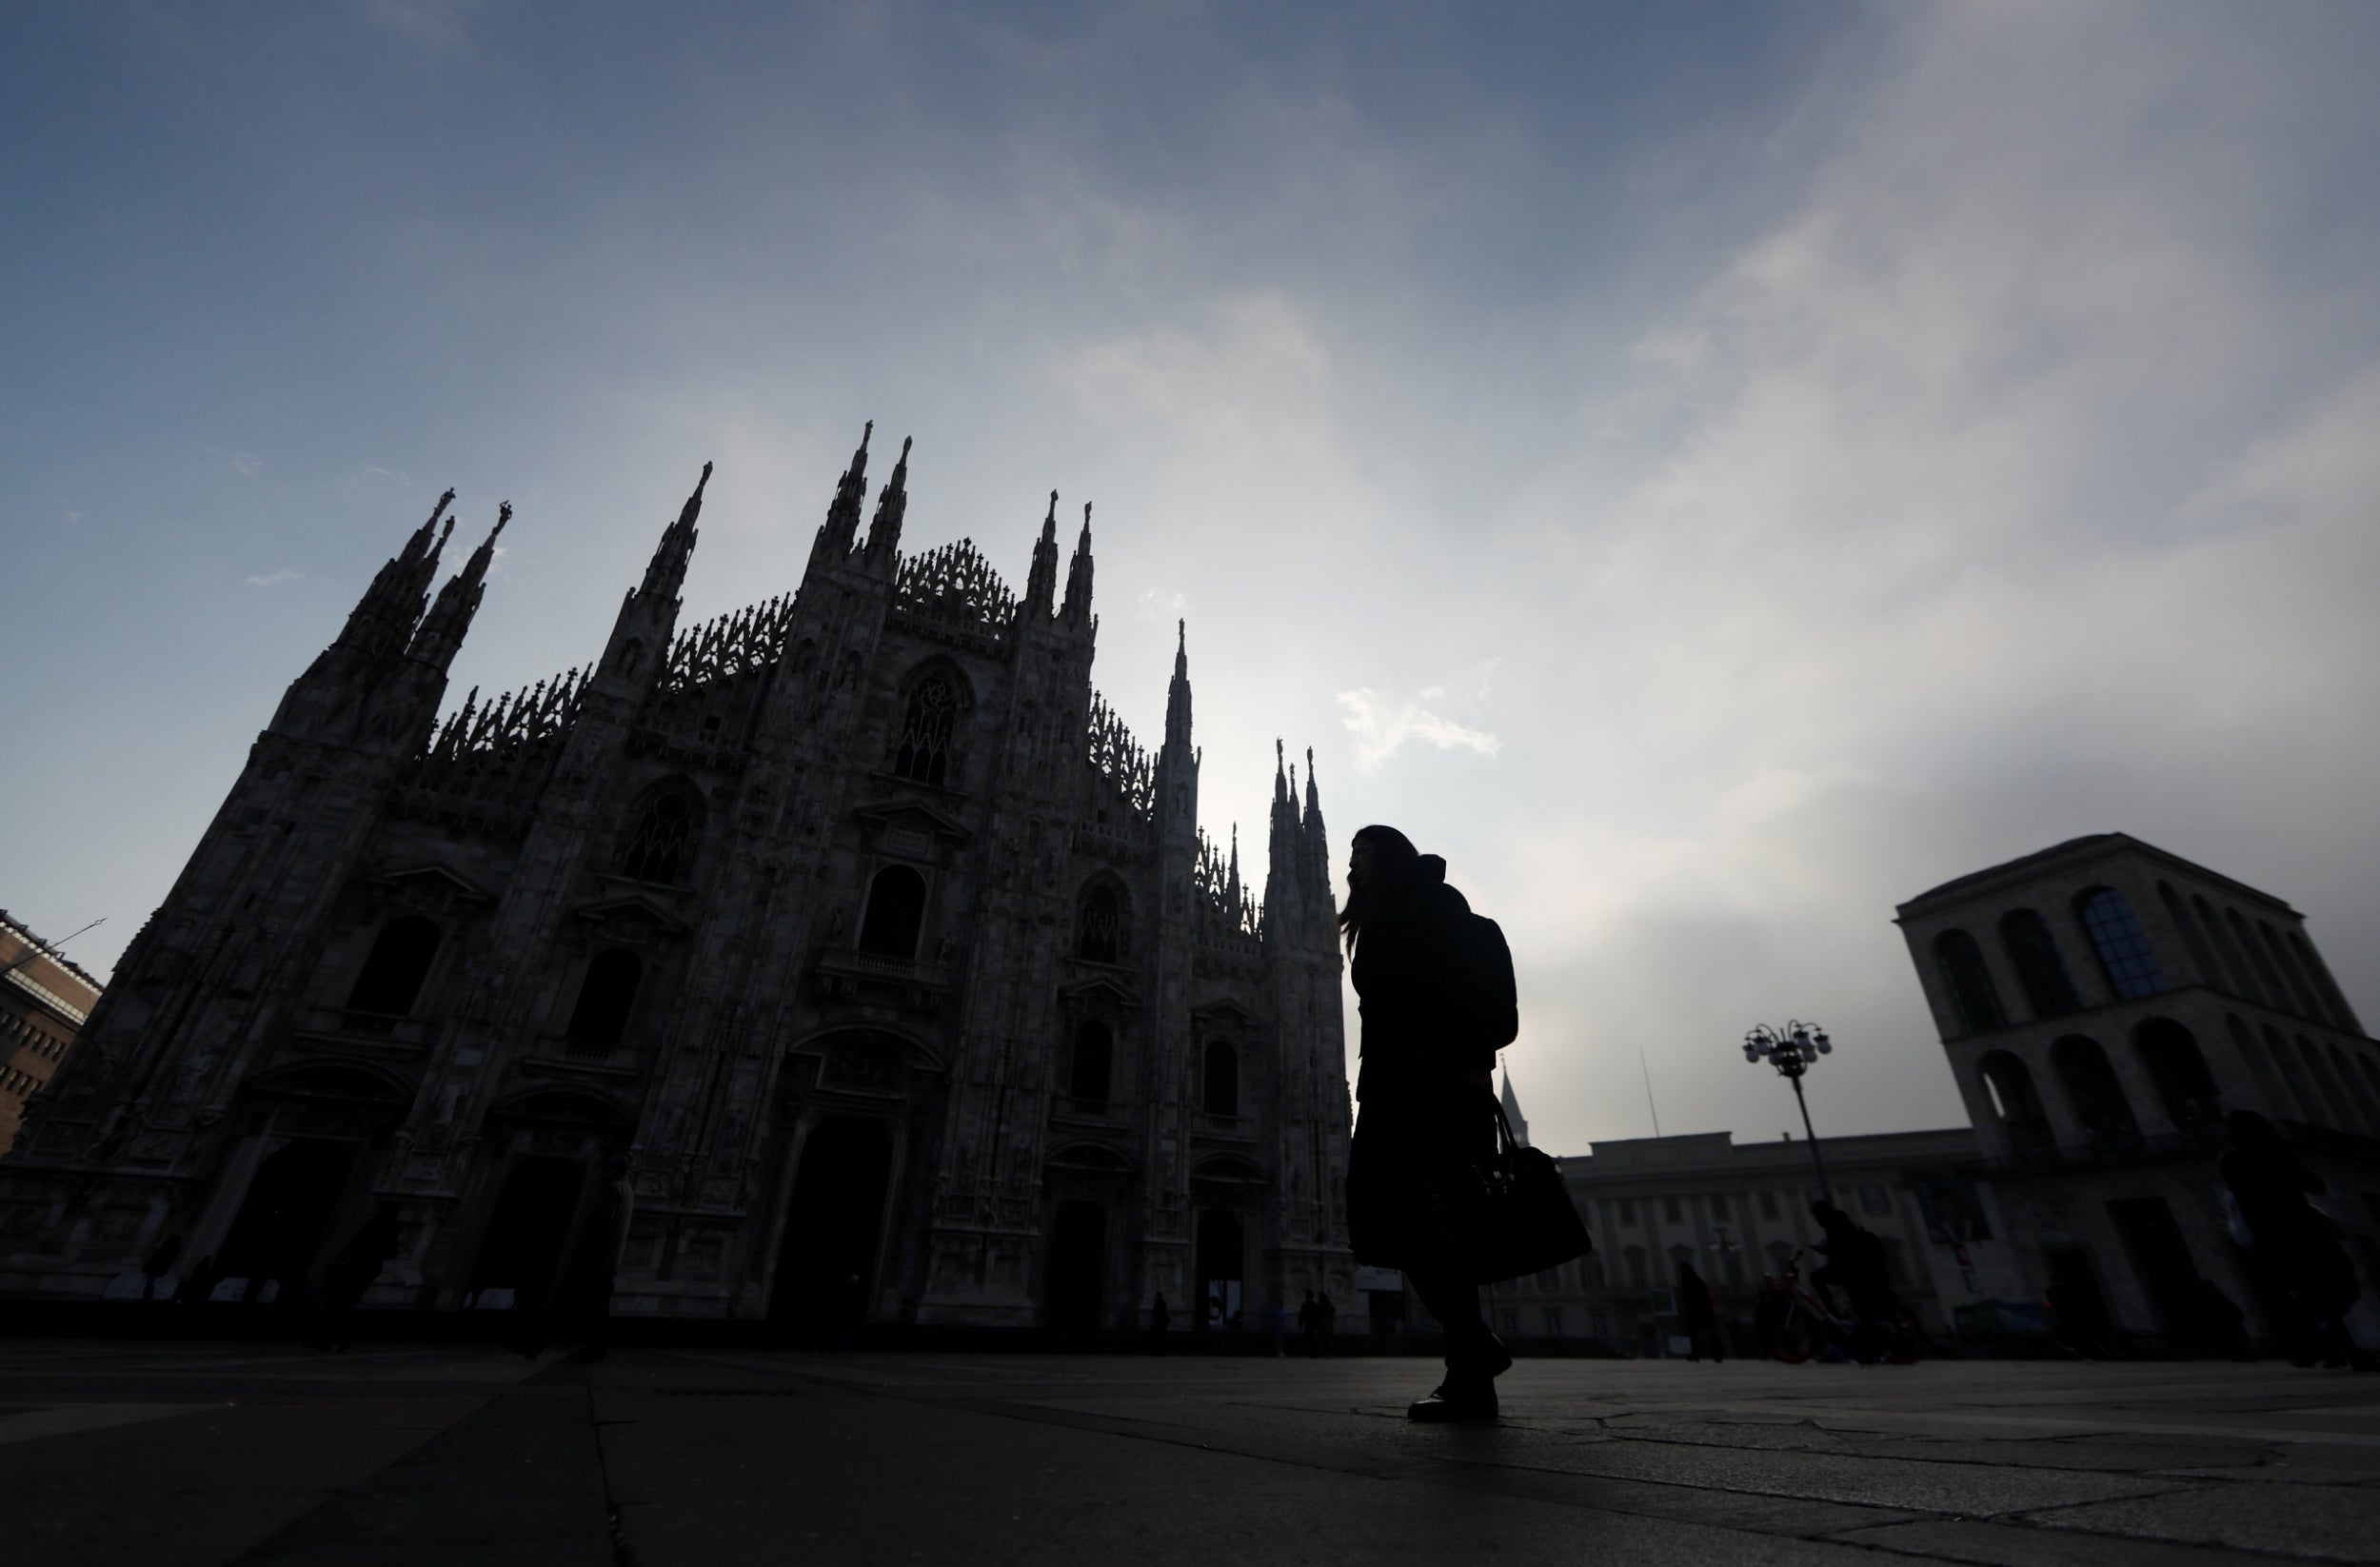 Piazza del Duomo in Milan, normally filled with tourists, stands empty as the coronavirus outbreak continues to grow